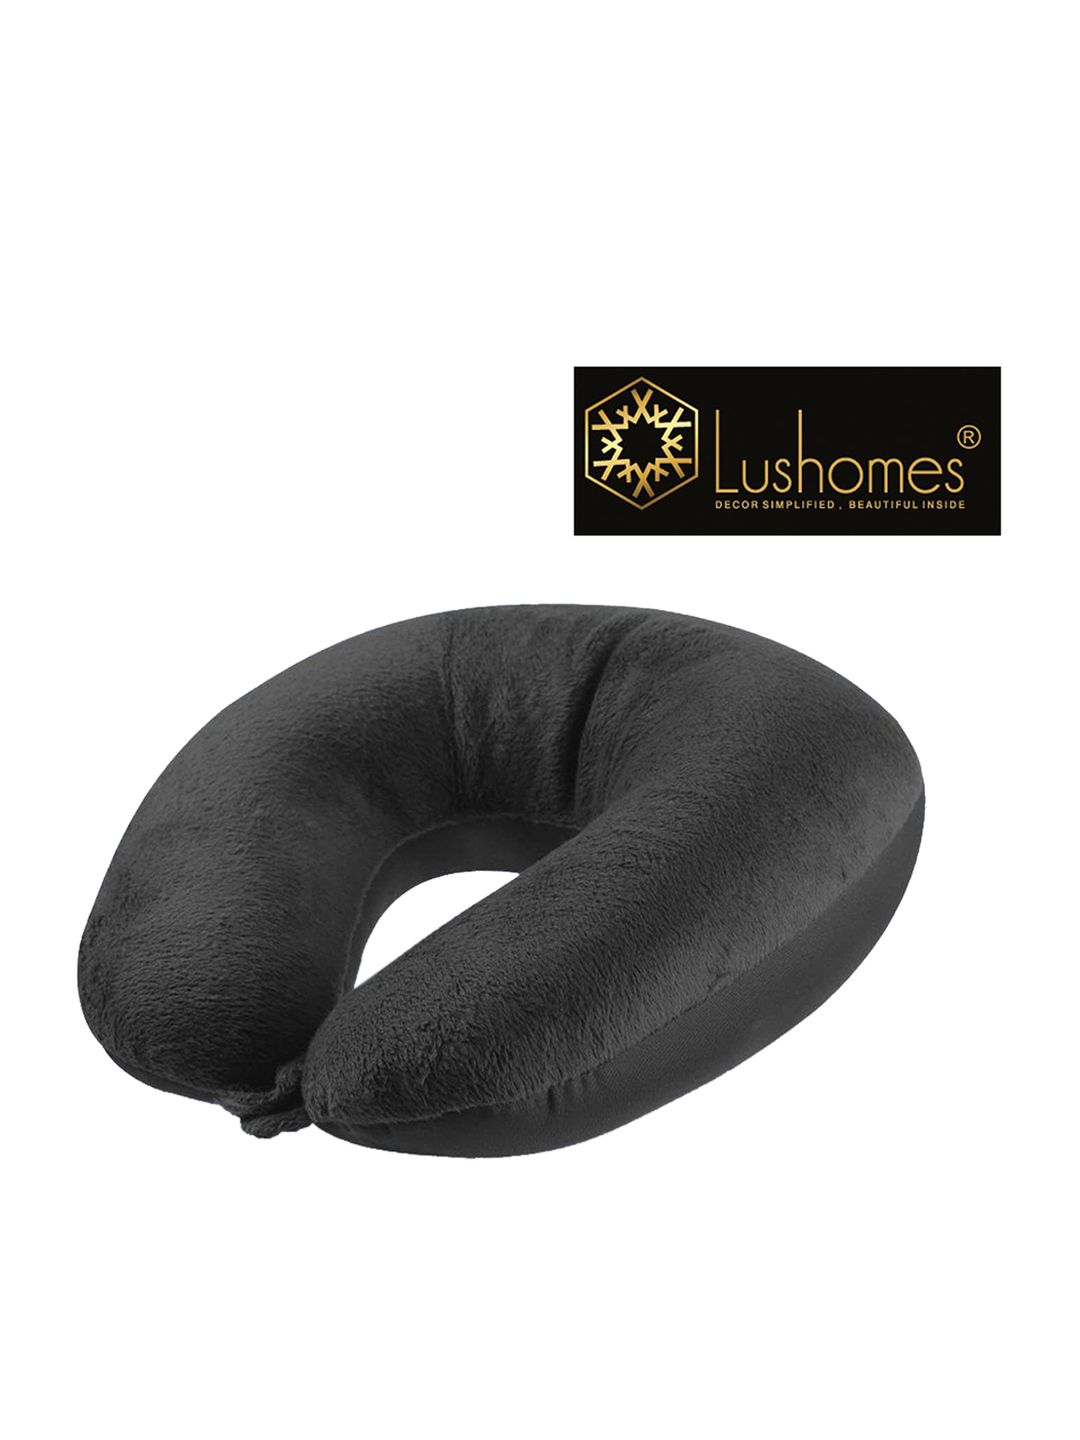 Lushomes Charcoal Grey Solid Velvet Travel Neck Pillow Price in India